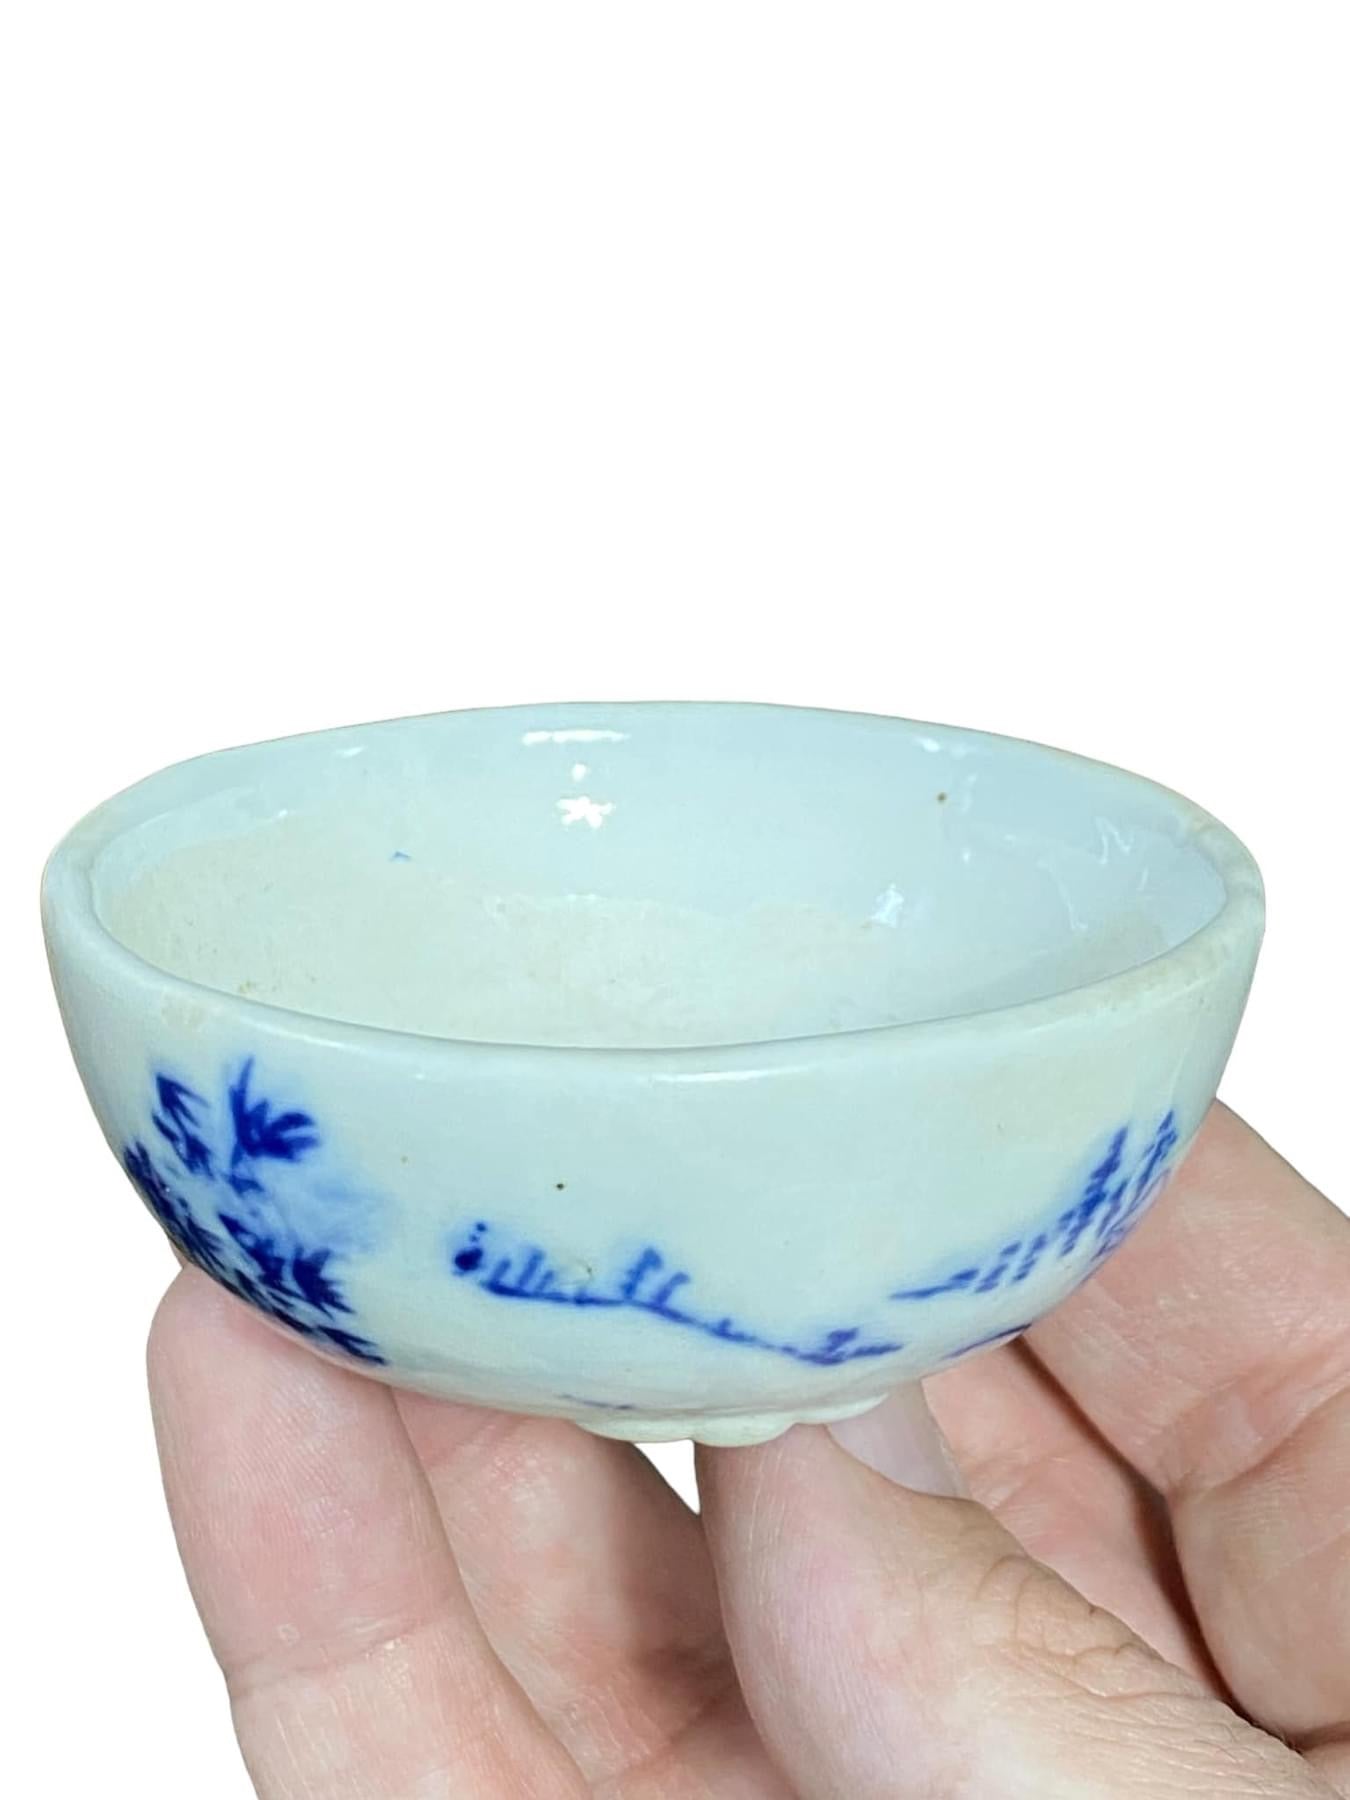 Painted Bonsai or Accent Pot from China